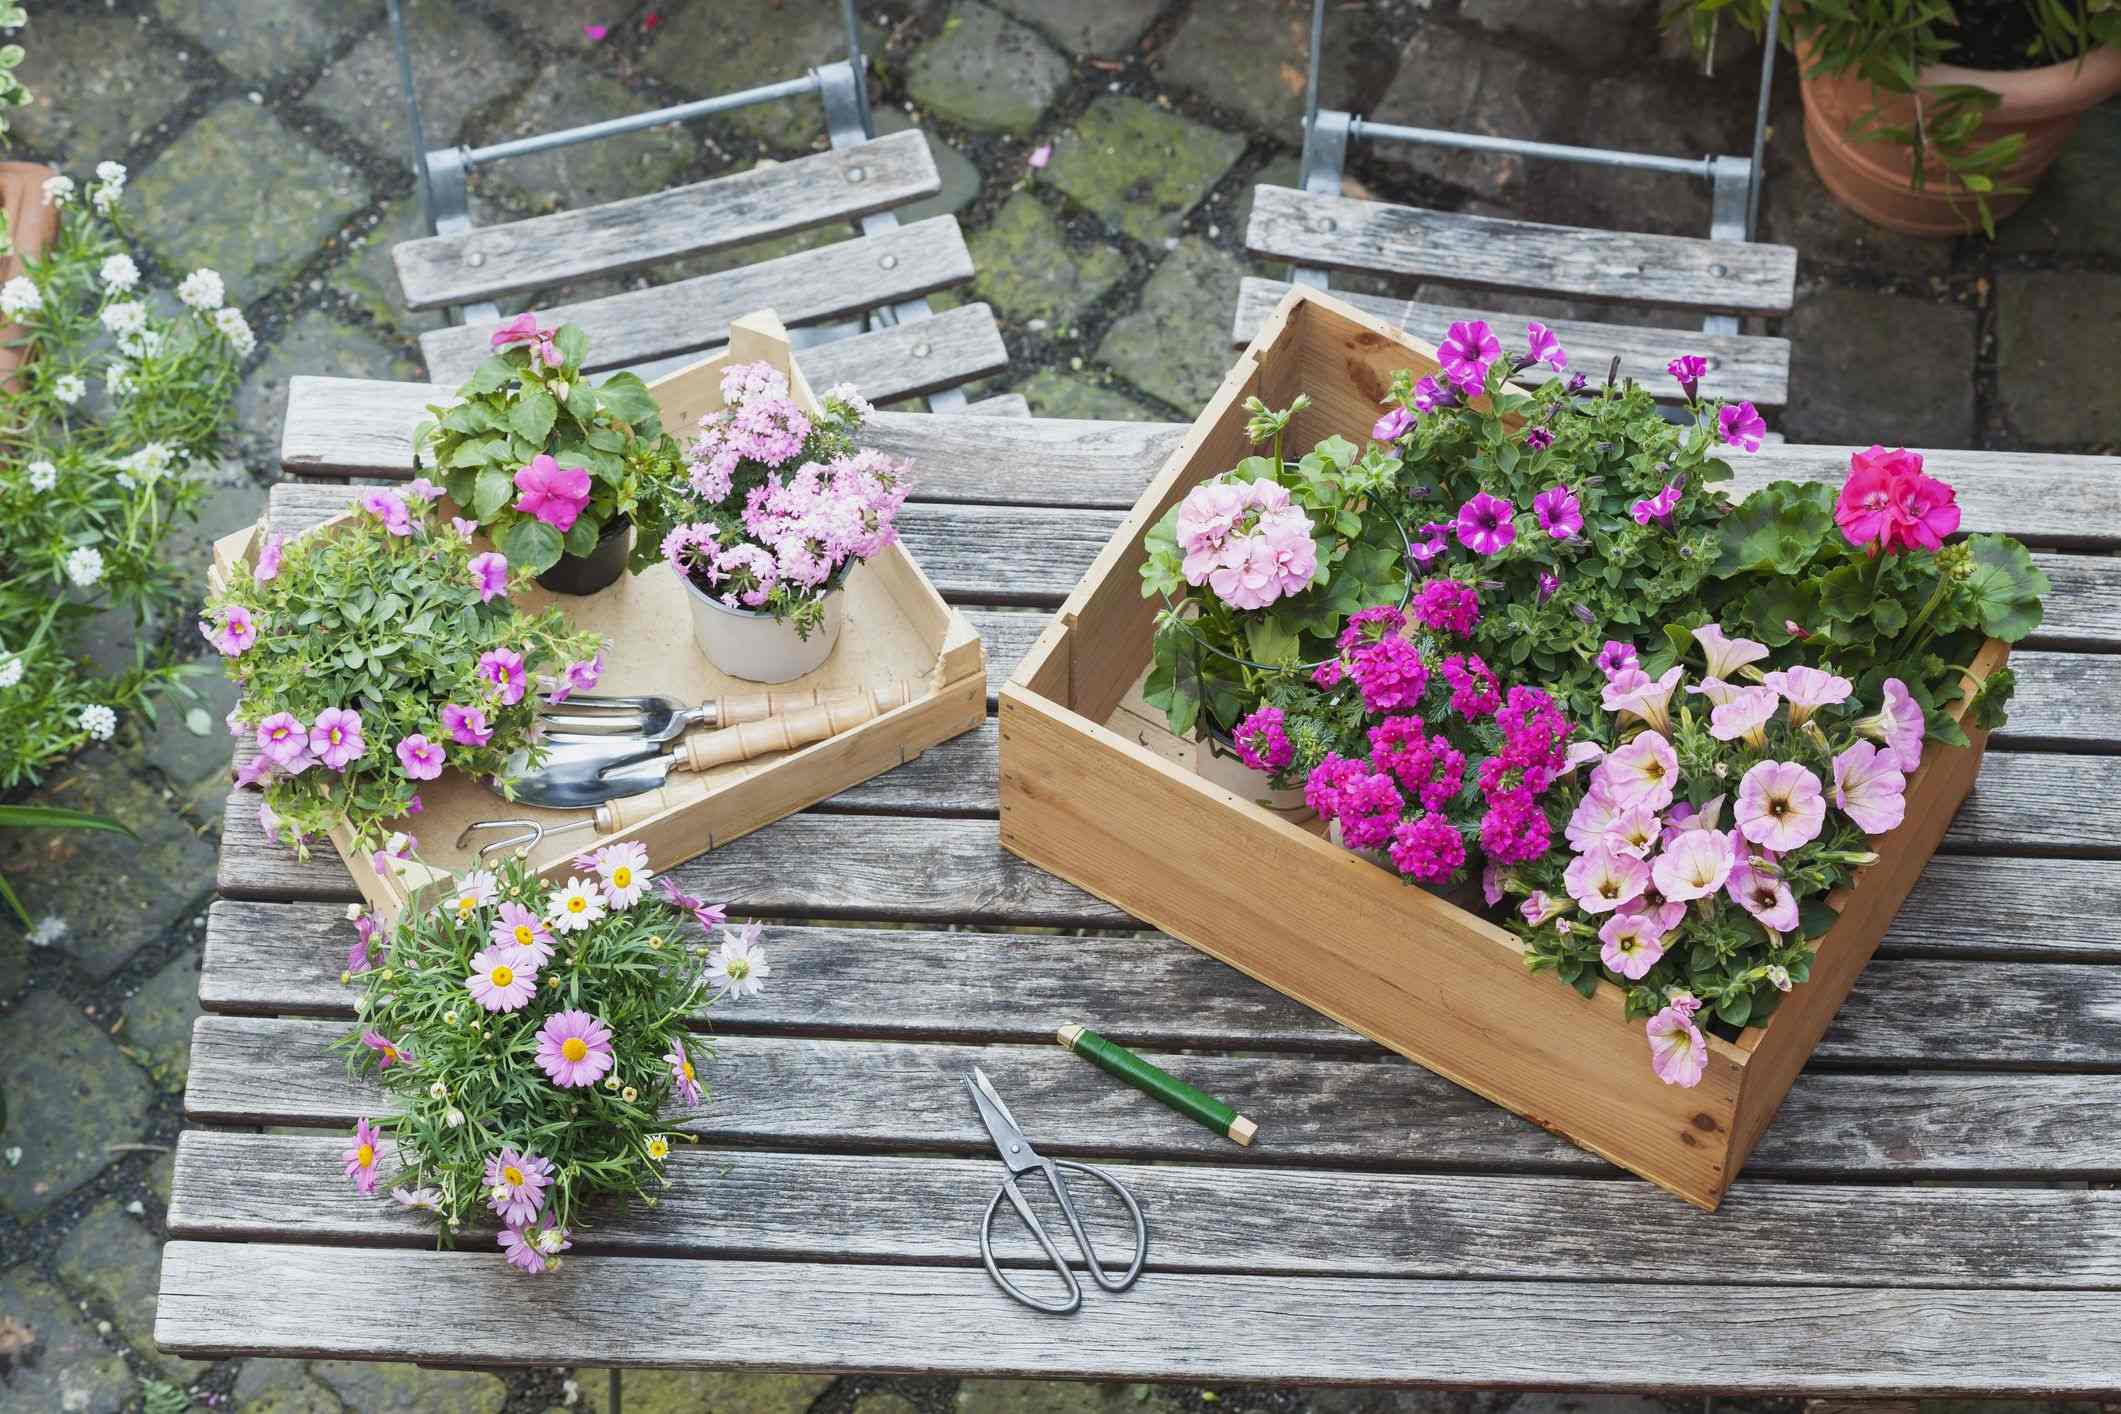 How To Prepare Flower Beds For Planting